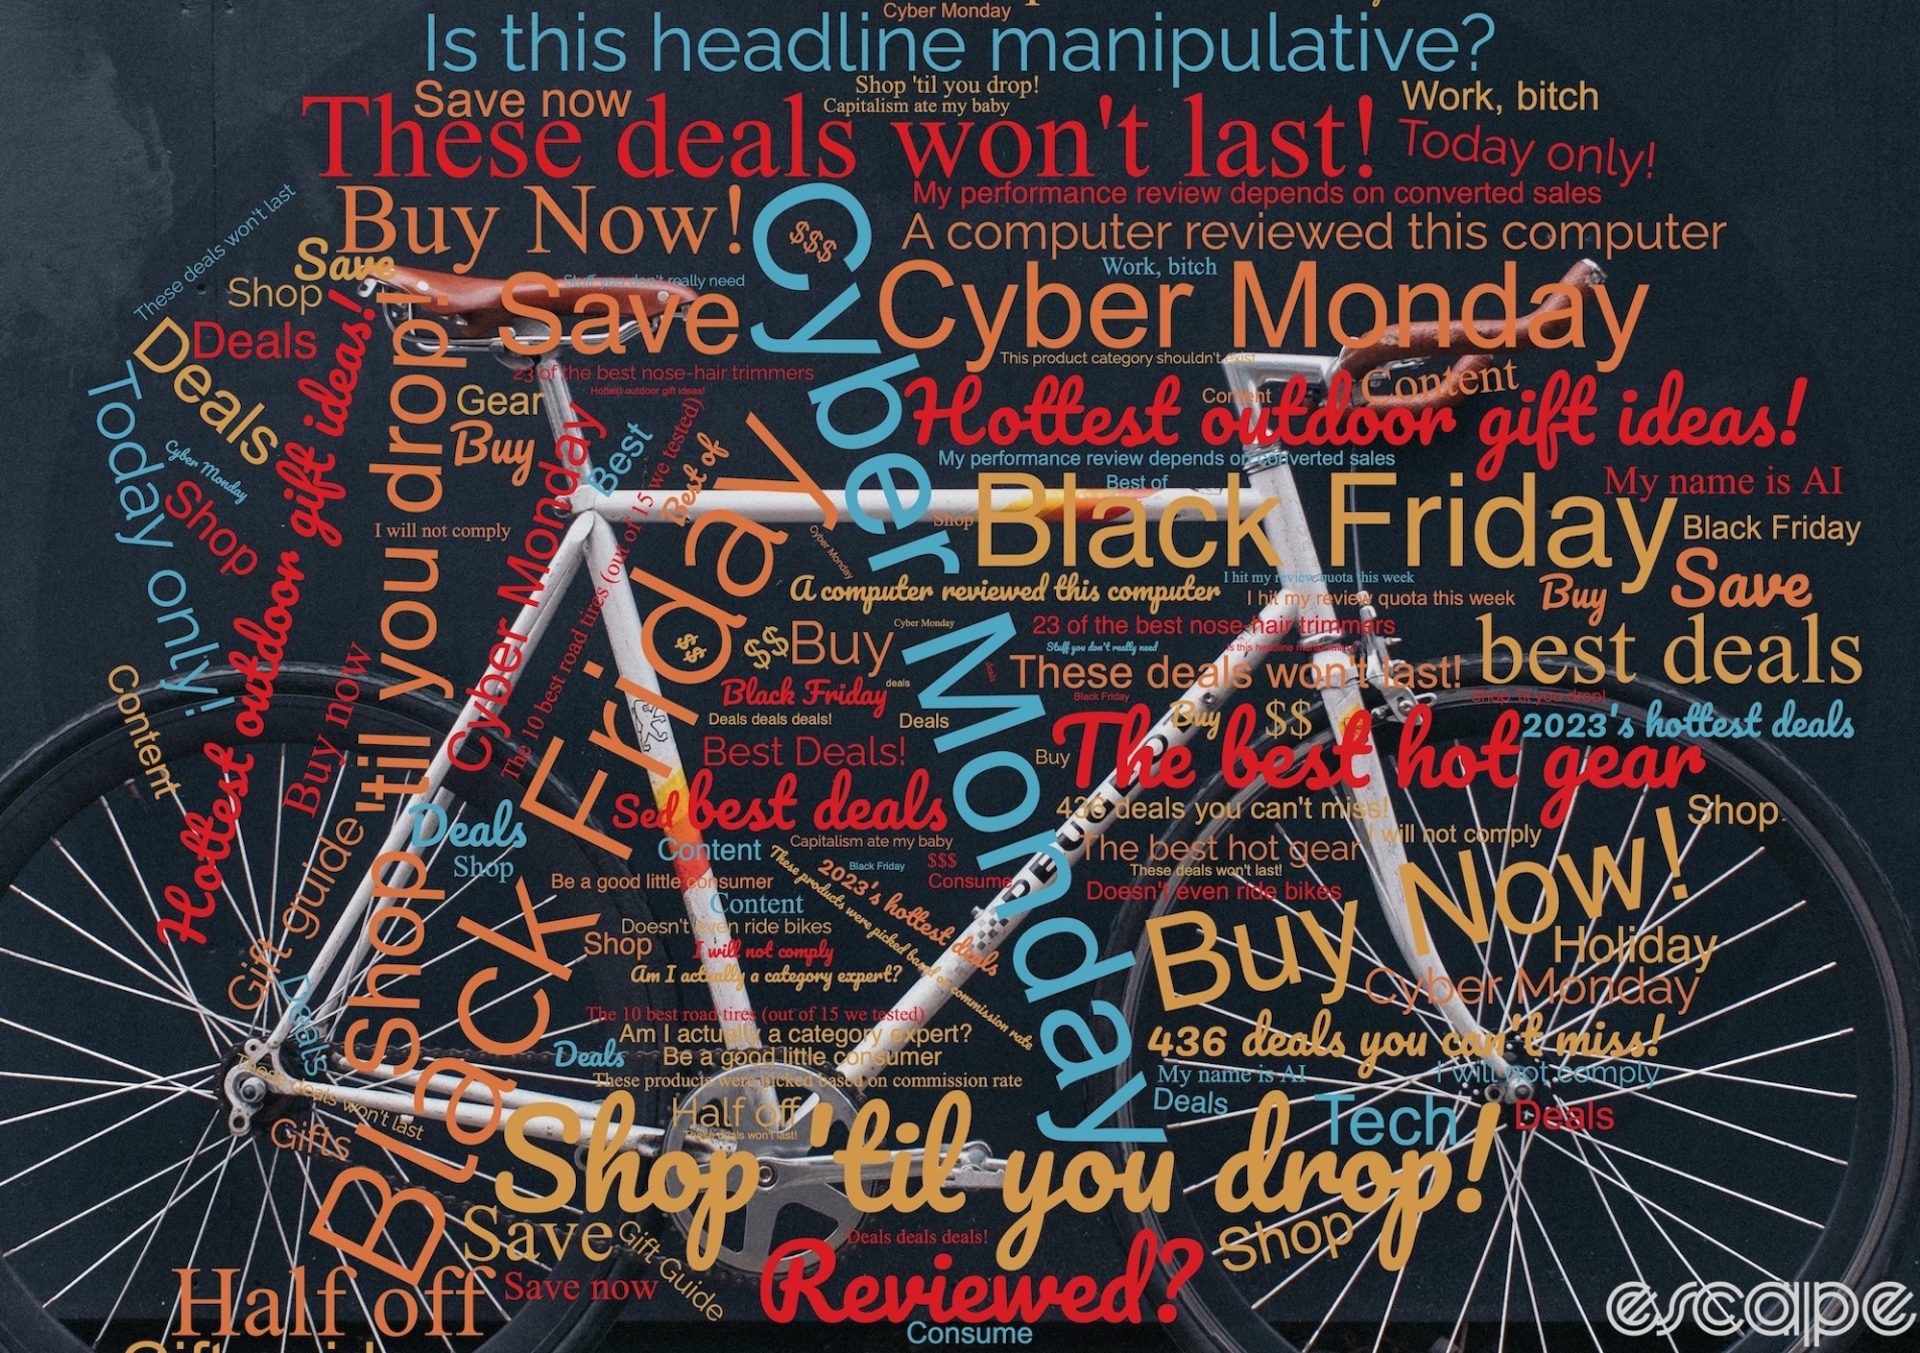 A word cloud of phrases from commerce content reviews, overlaid on an image of a white Peugeot fixie.